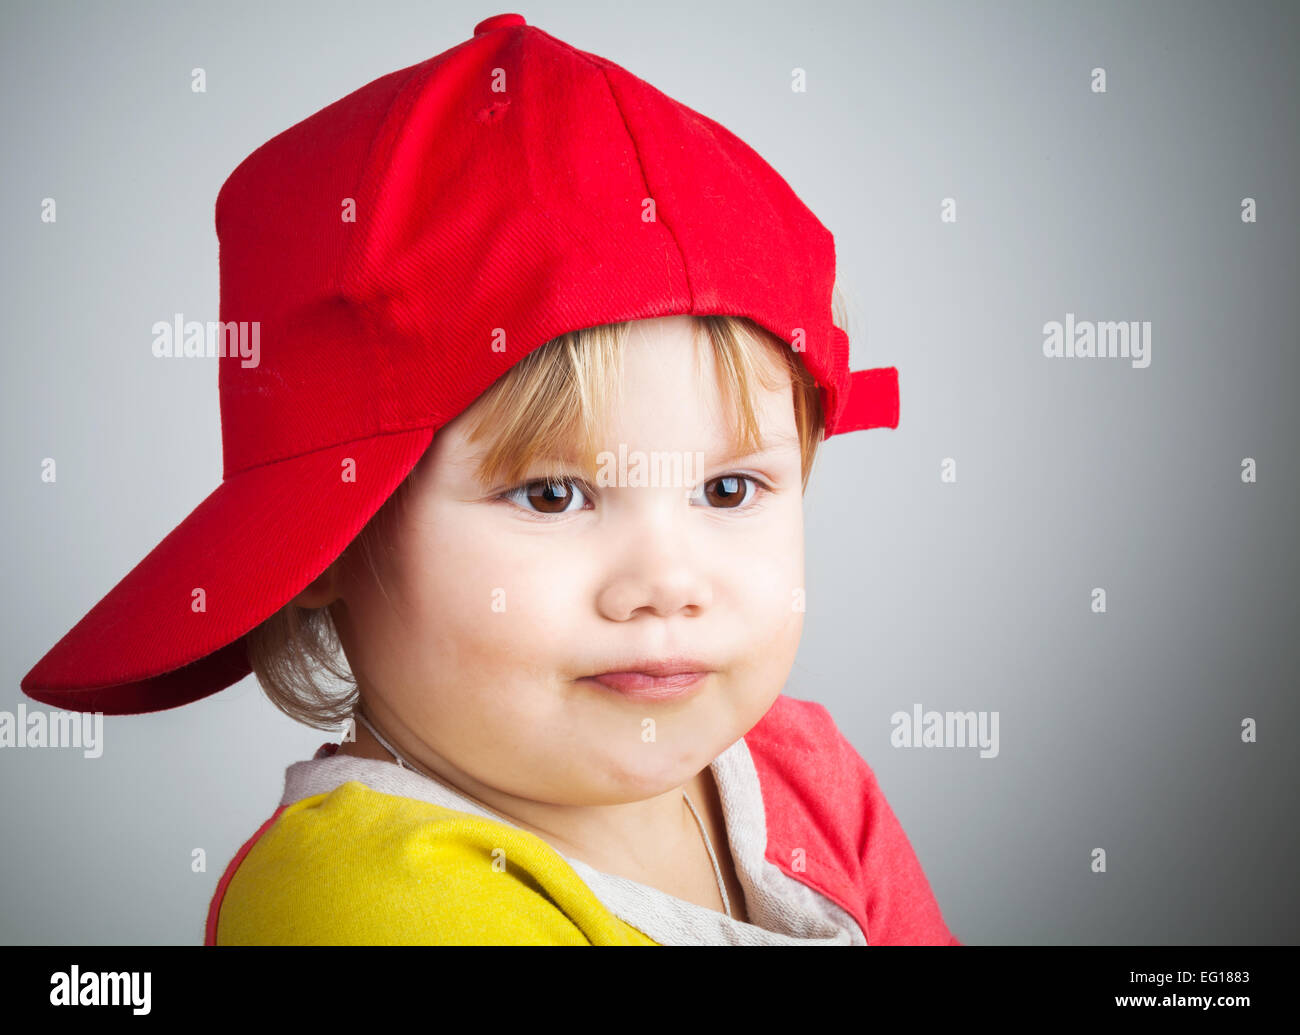 Studio portrait of funny little child in a red baseball cap Stock Photo